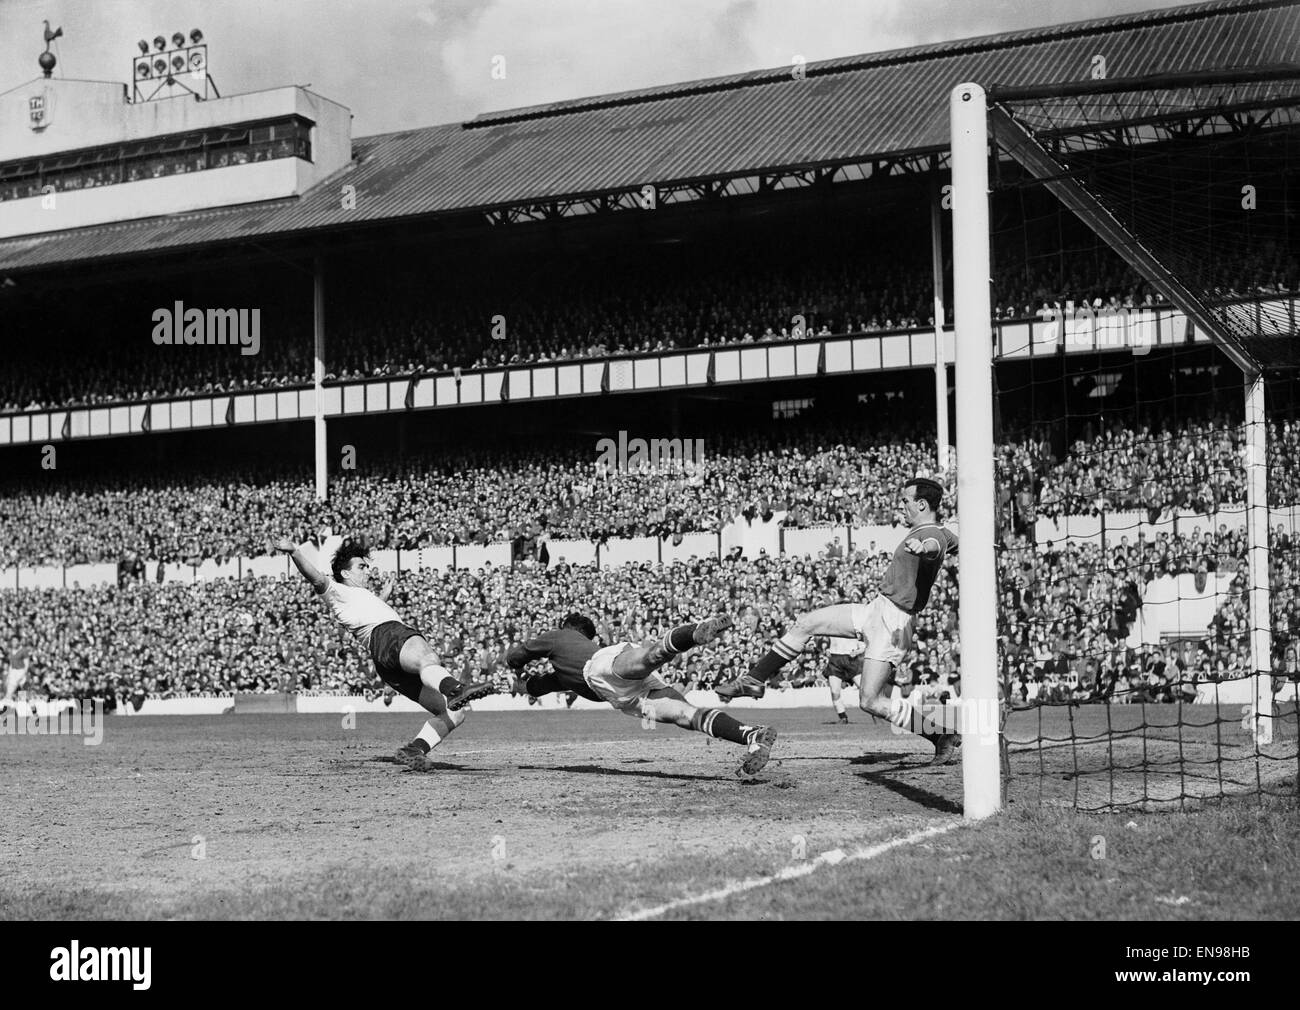 English League Division One match at White Hart Lane. Tottenham Hotspur 0 v Chelsea 1. Chelsea goalkeeeper Peter Bonetti dibves at the feet of Spurs forward Bobby Smith, as John Sillett looks to defend on the goal line. 18th April 1960. Stock Photo